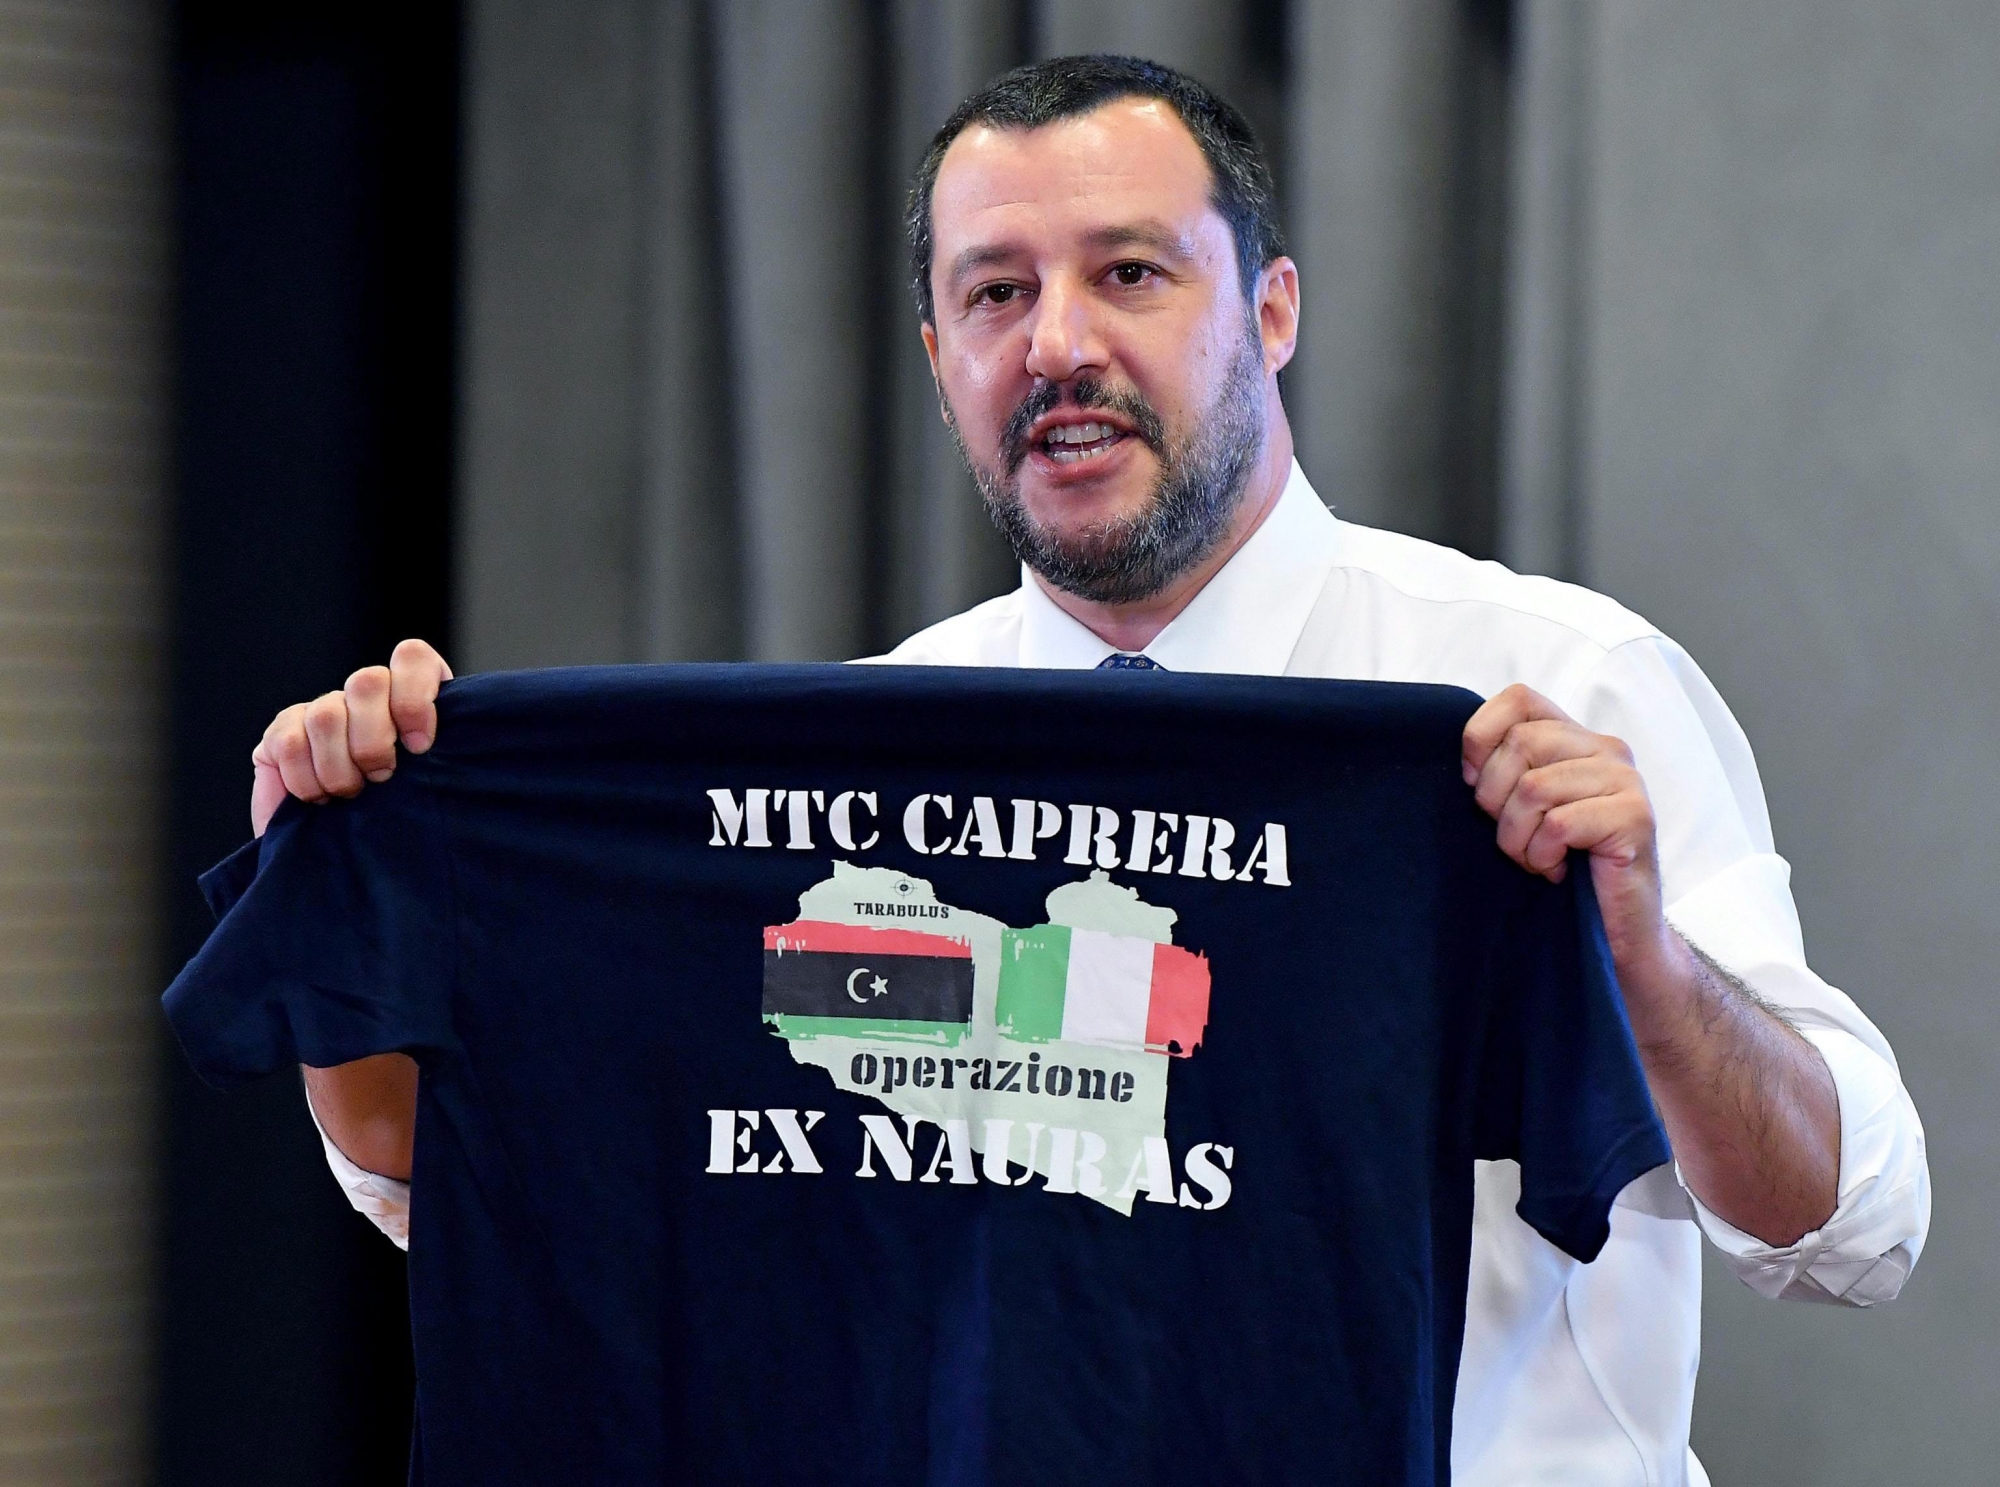 epa06839632 Italian Interior Minister Matteo Salvini shows a T-shirt of Italian Navy with Libyan and Italian flags during a press conference at Viminale palace in Rome, 25 June 2018. According to reports, earlier in the day Salvini visited Tripolis and called to create migrant reception centers in Libya.  EPA/ETTORE FERRARI ITALY GOVERNMENT MIGRATION